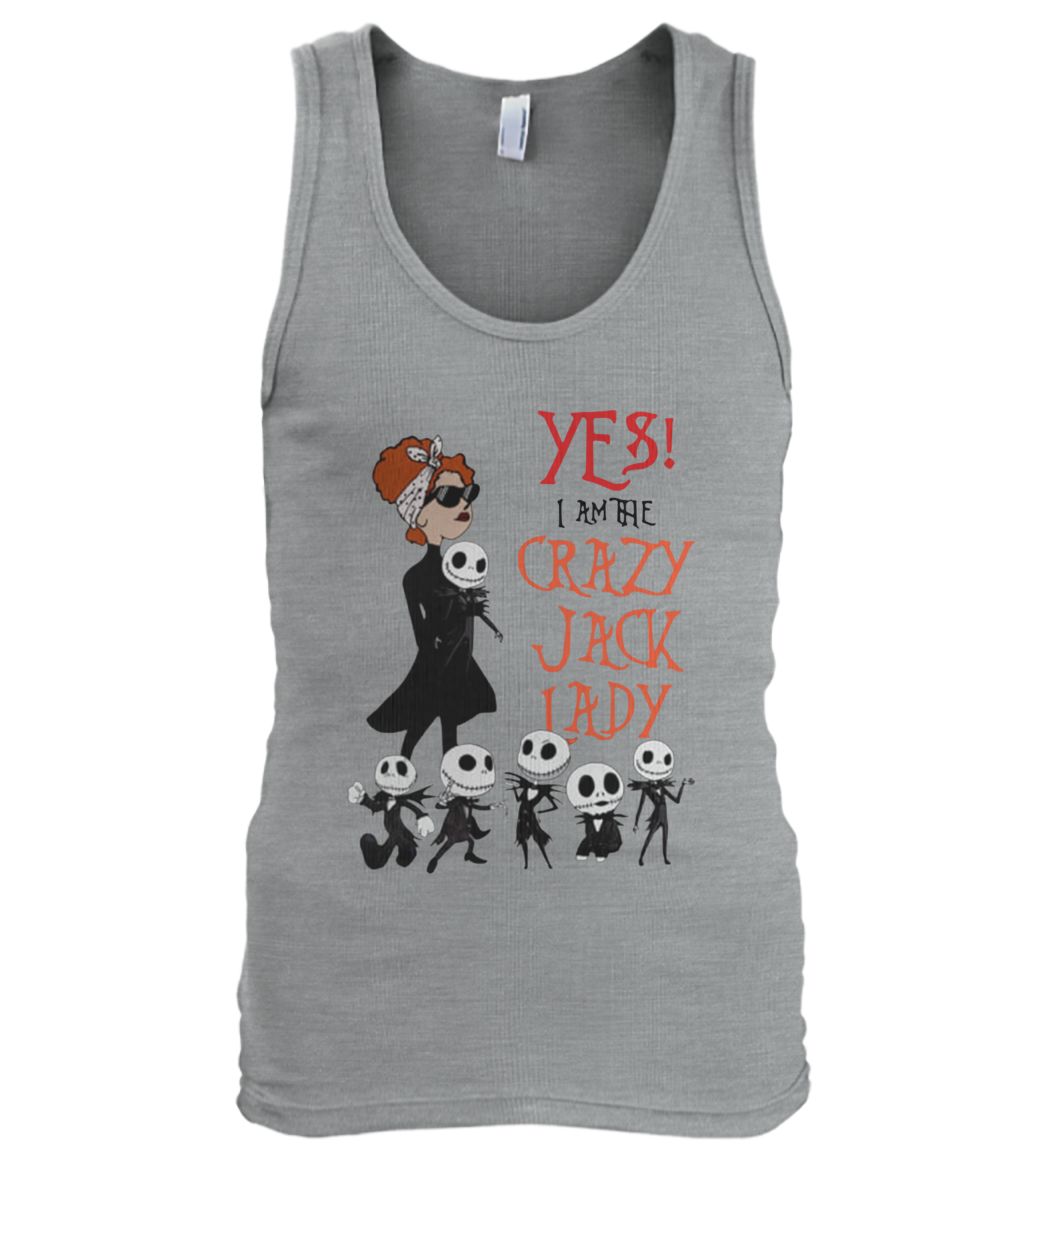 Yes I am the crazy jack lady men's tank top